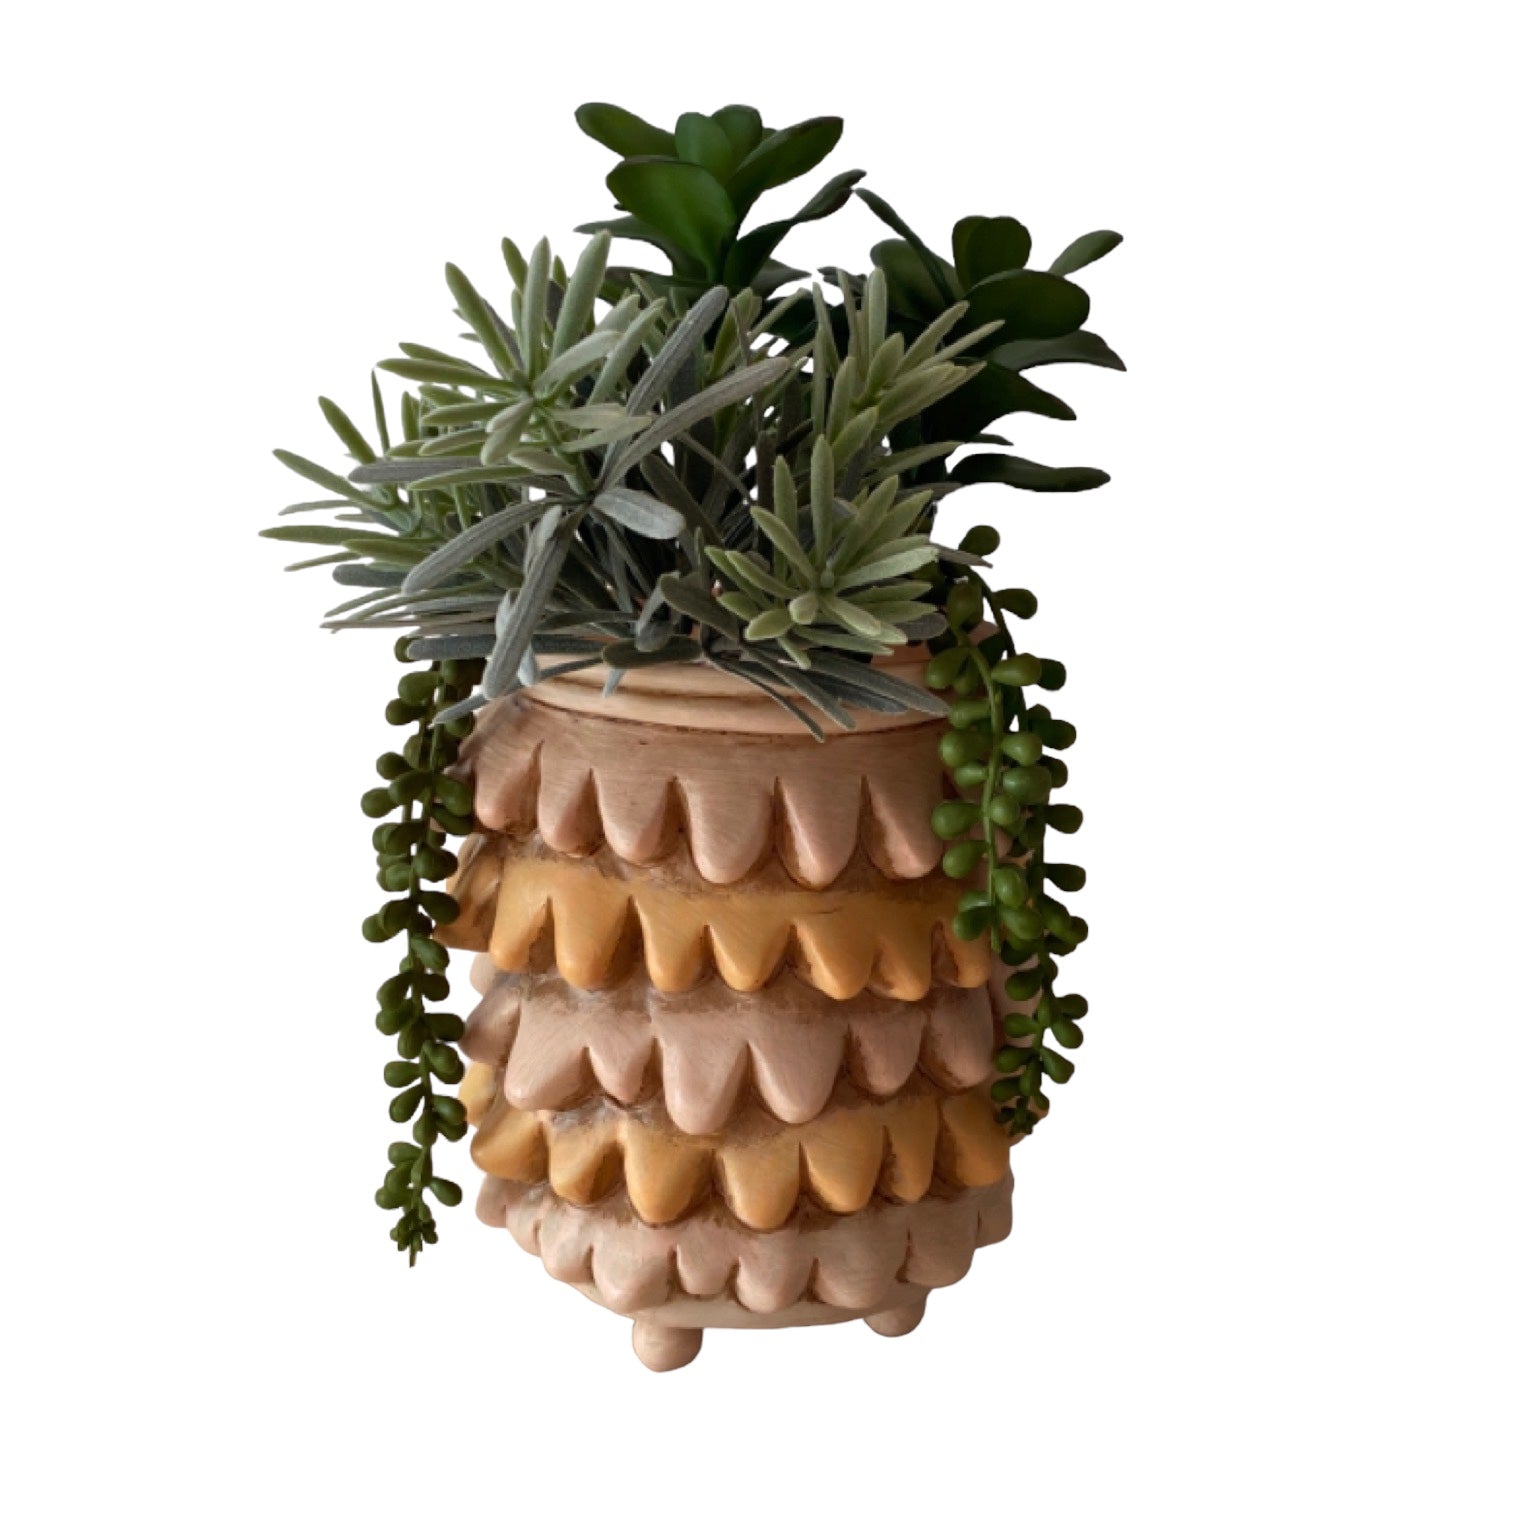 Pot or Vase Planter Vera Fringe Funky Plant Large - The Renmy Store Homewares & Gifts 